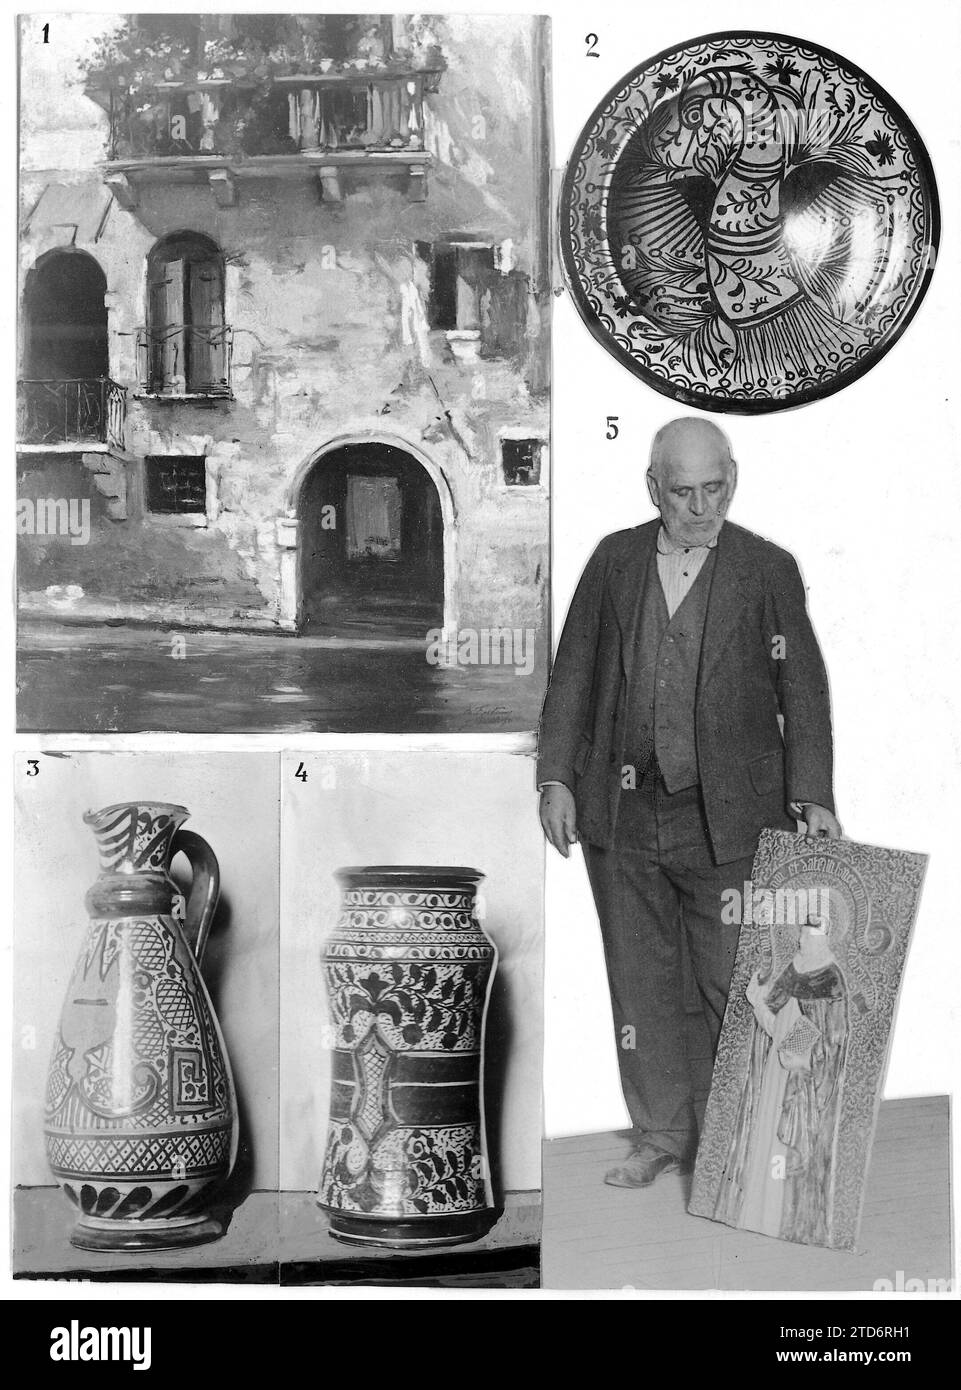 12/17/1923. Madrid. From Current Artistic Exhibitions. 1.- 'a canal in Venice', painting by the painter Mariano Fortuny Madrazo. 2.- Pardalot dish. 3 and 4.- Arab vessels. 5.- the ceramist Francisco Mora, author of the Previous Works. Credit: Album / Archivo ABC / Julio Duque Stock Photo